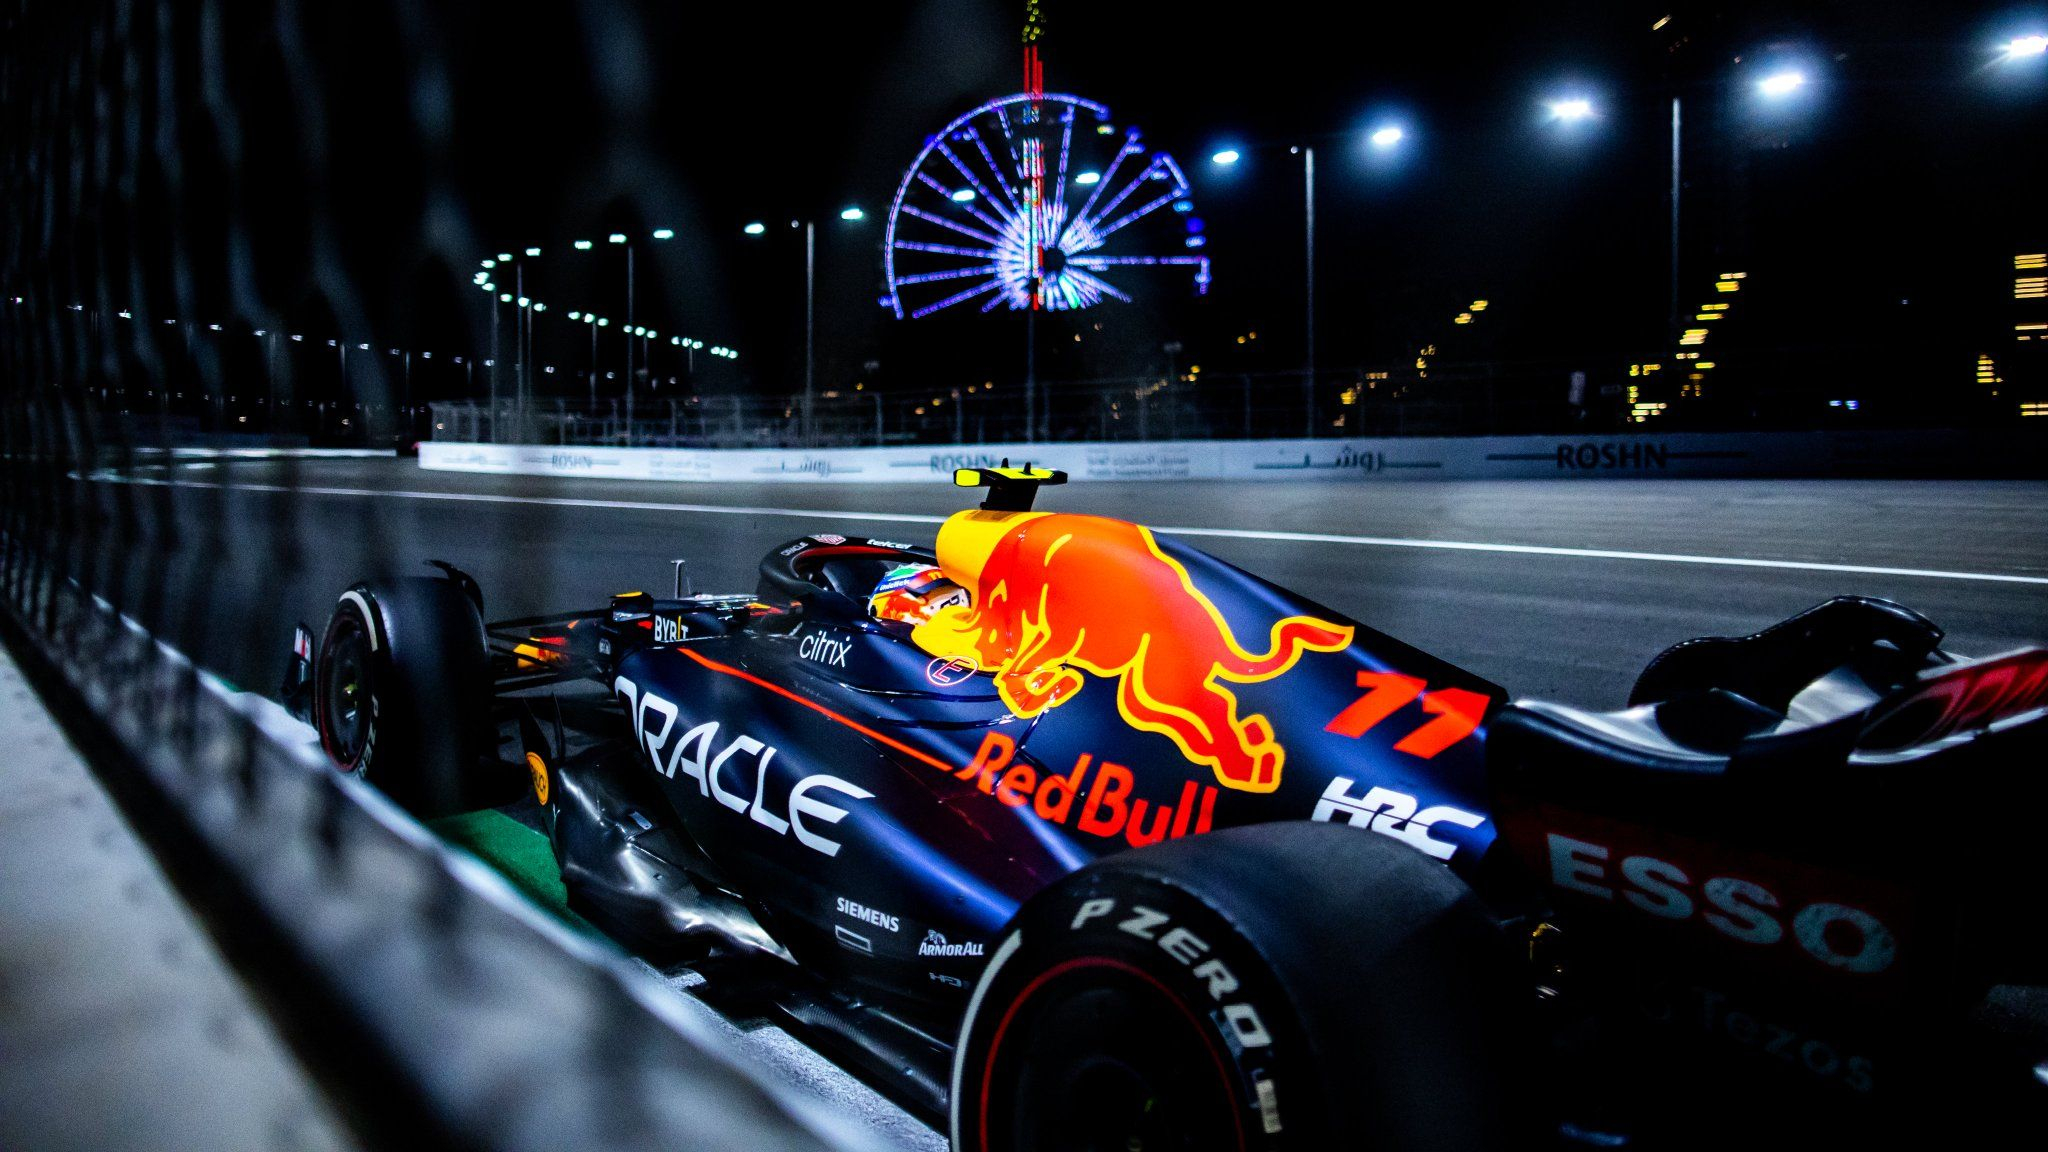 2048x1152 Oracle Red Bull Racing on Twitter in 2022 | Red bull racing, Racing, Red bull